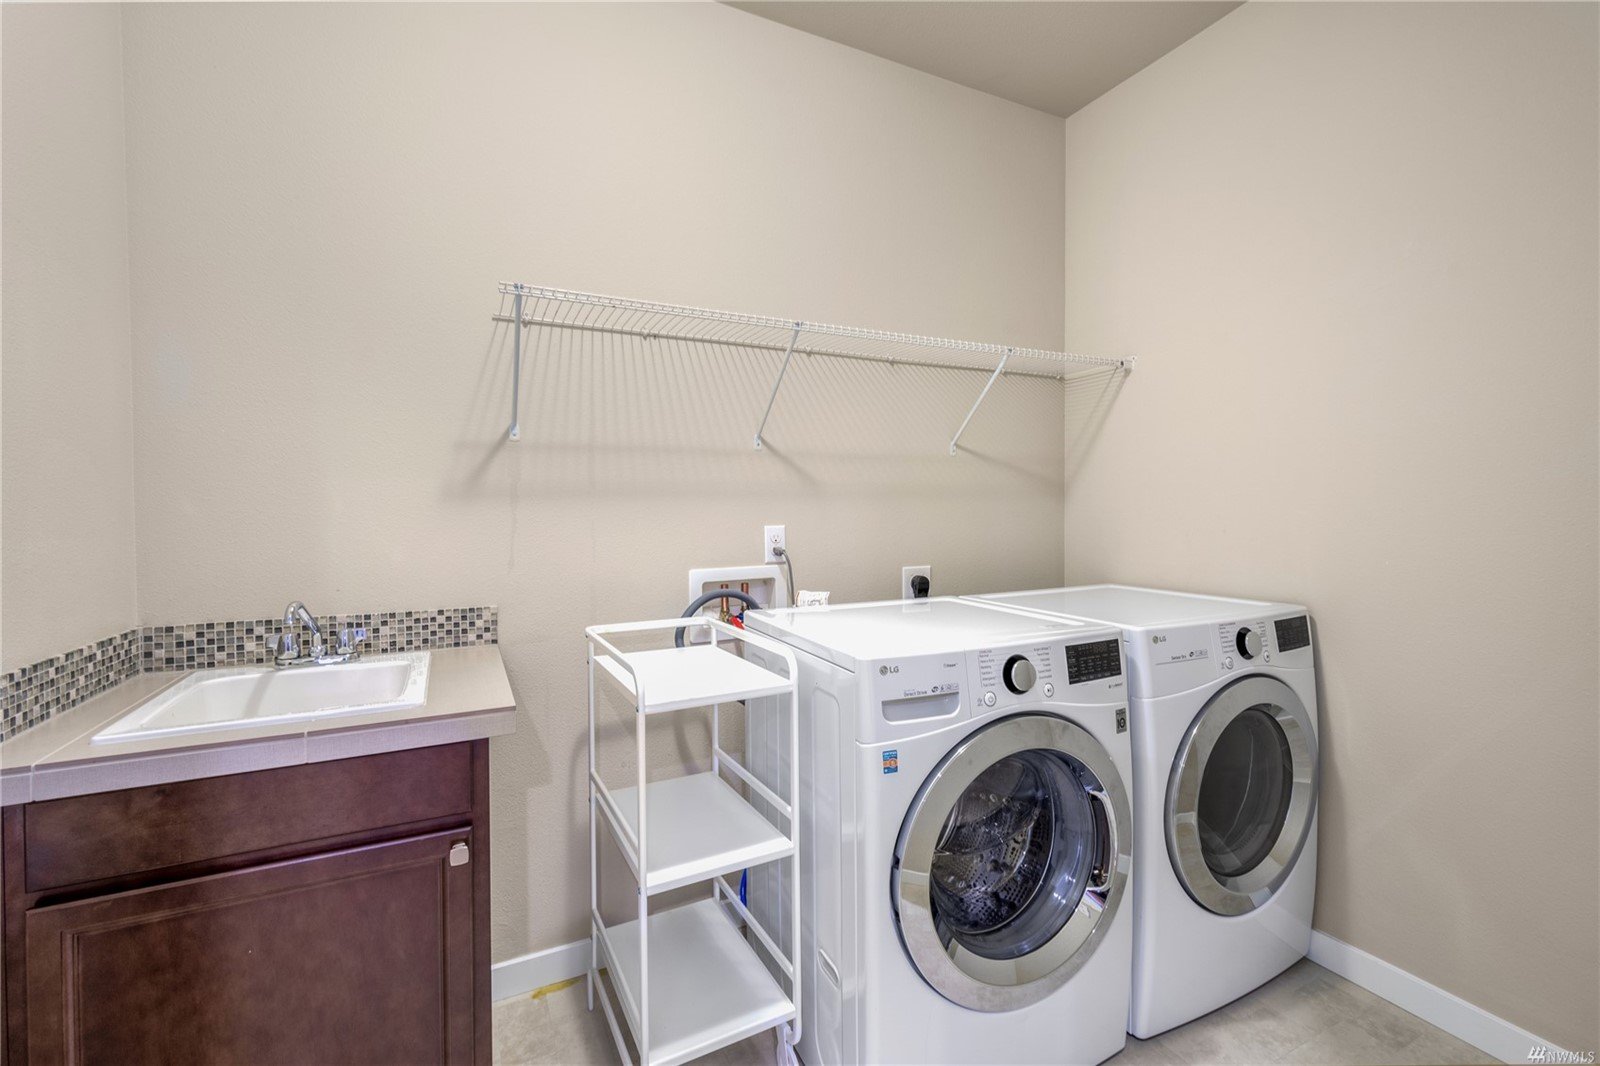 Utility room with modern washer and dryer